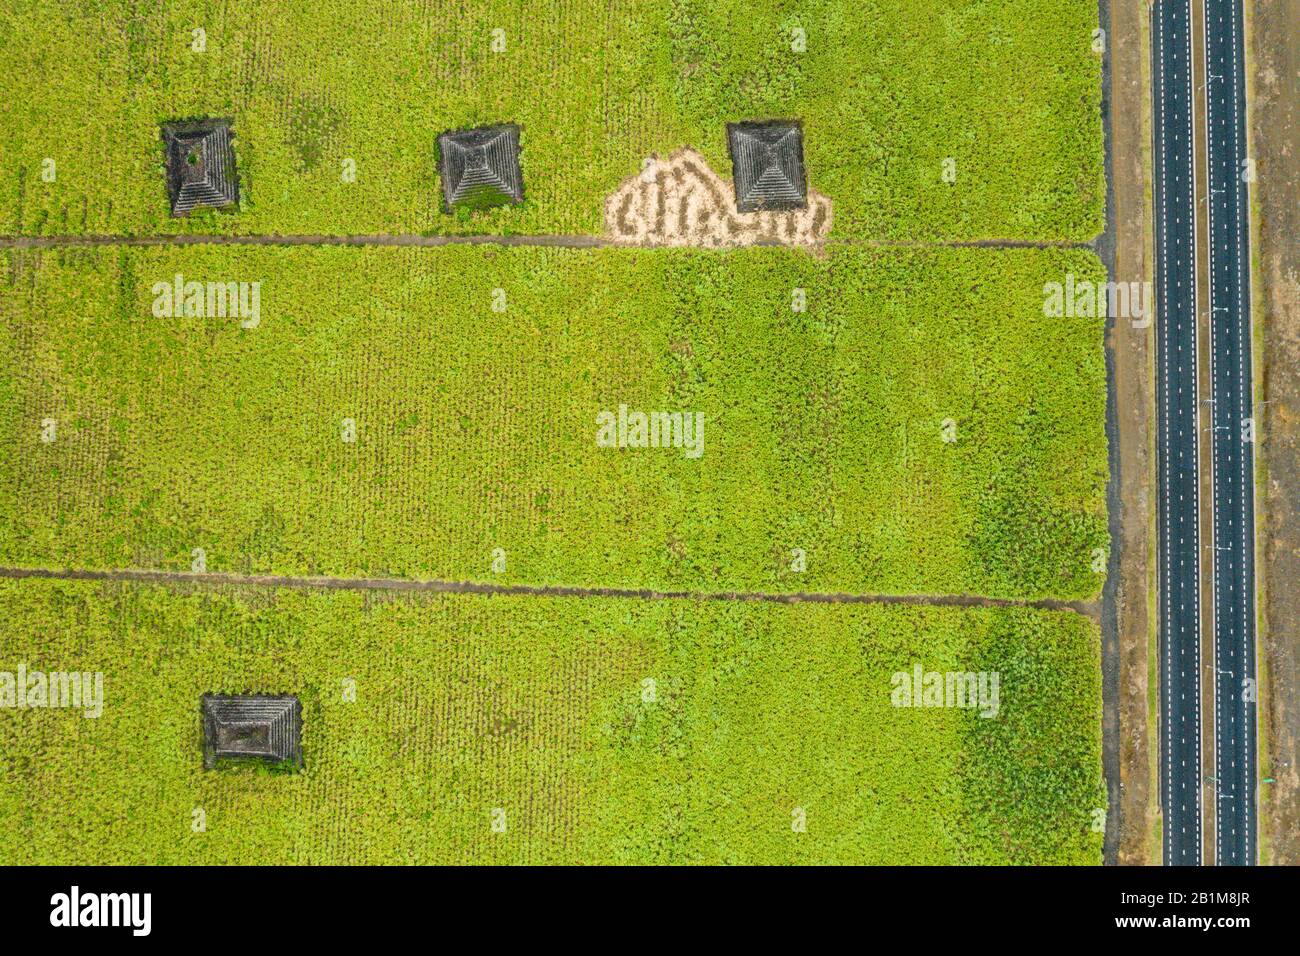 Asphalt road beside the stone pyramids in green fields, aerial view, Plaine Magnien, Grand Port, Indian Ocean, Mauritius Stock Photo